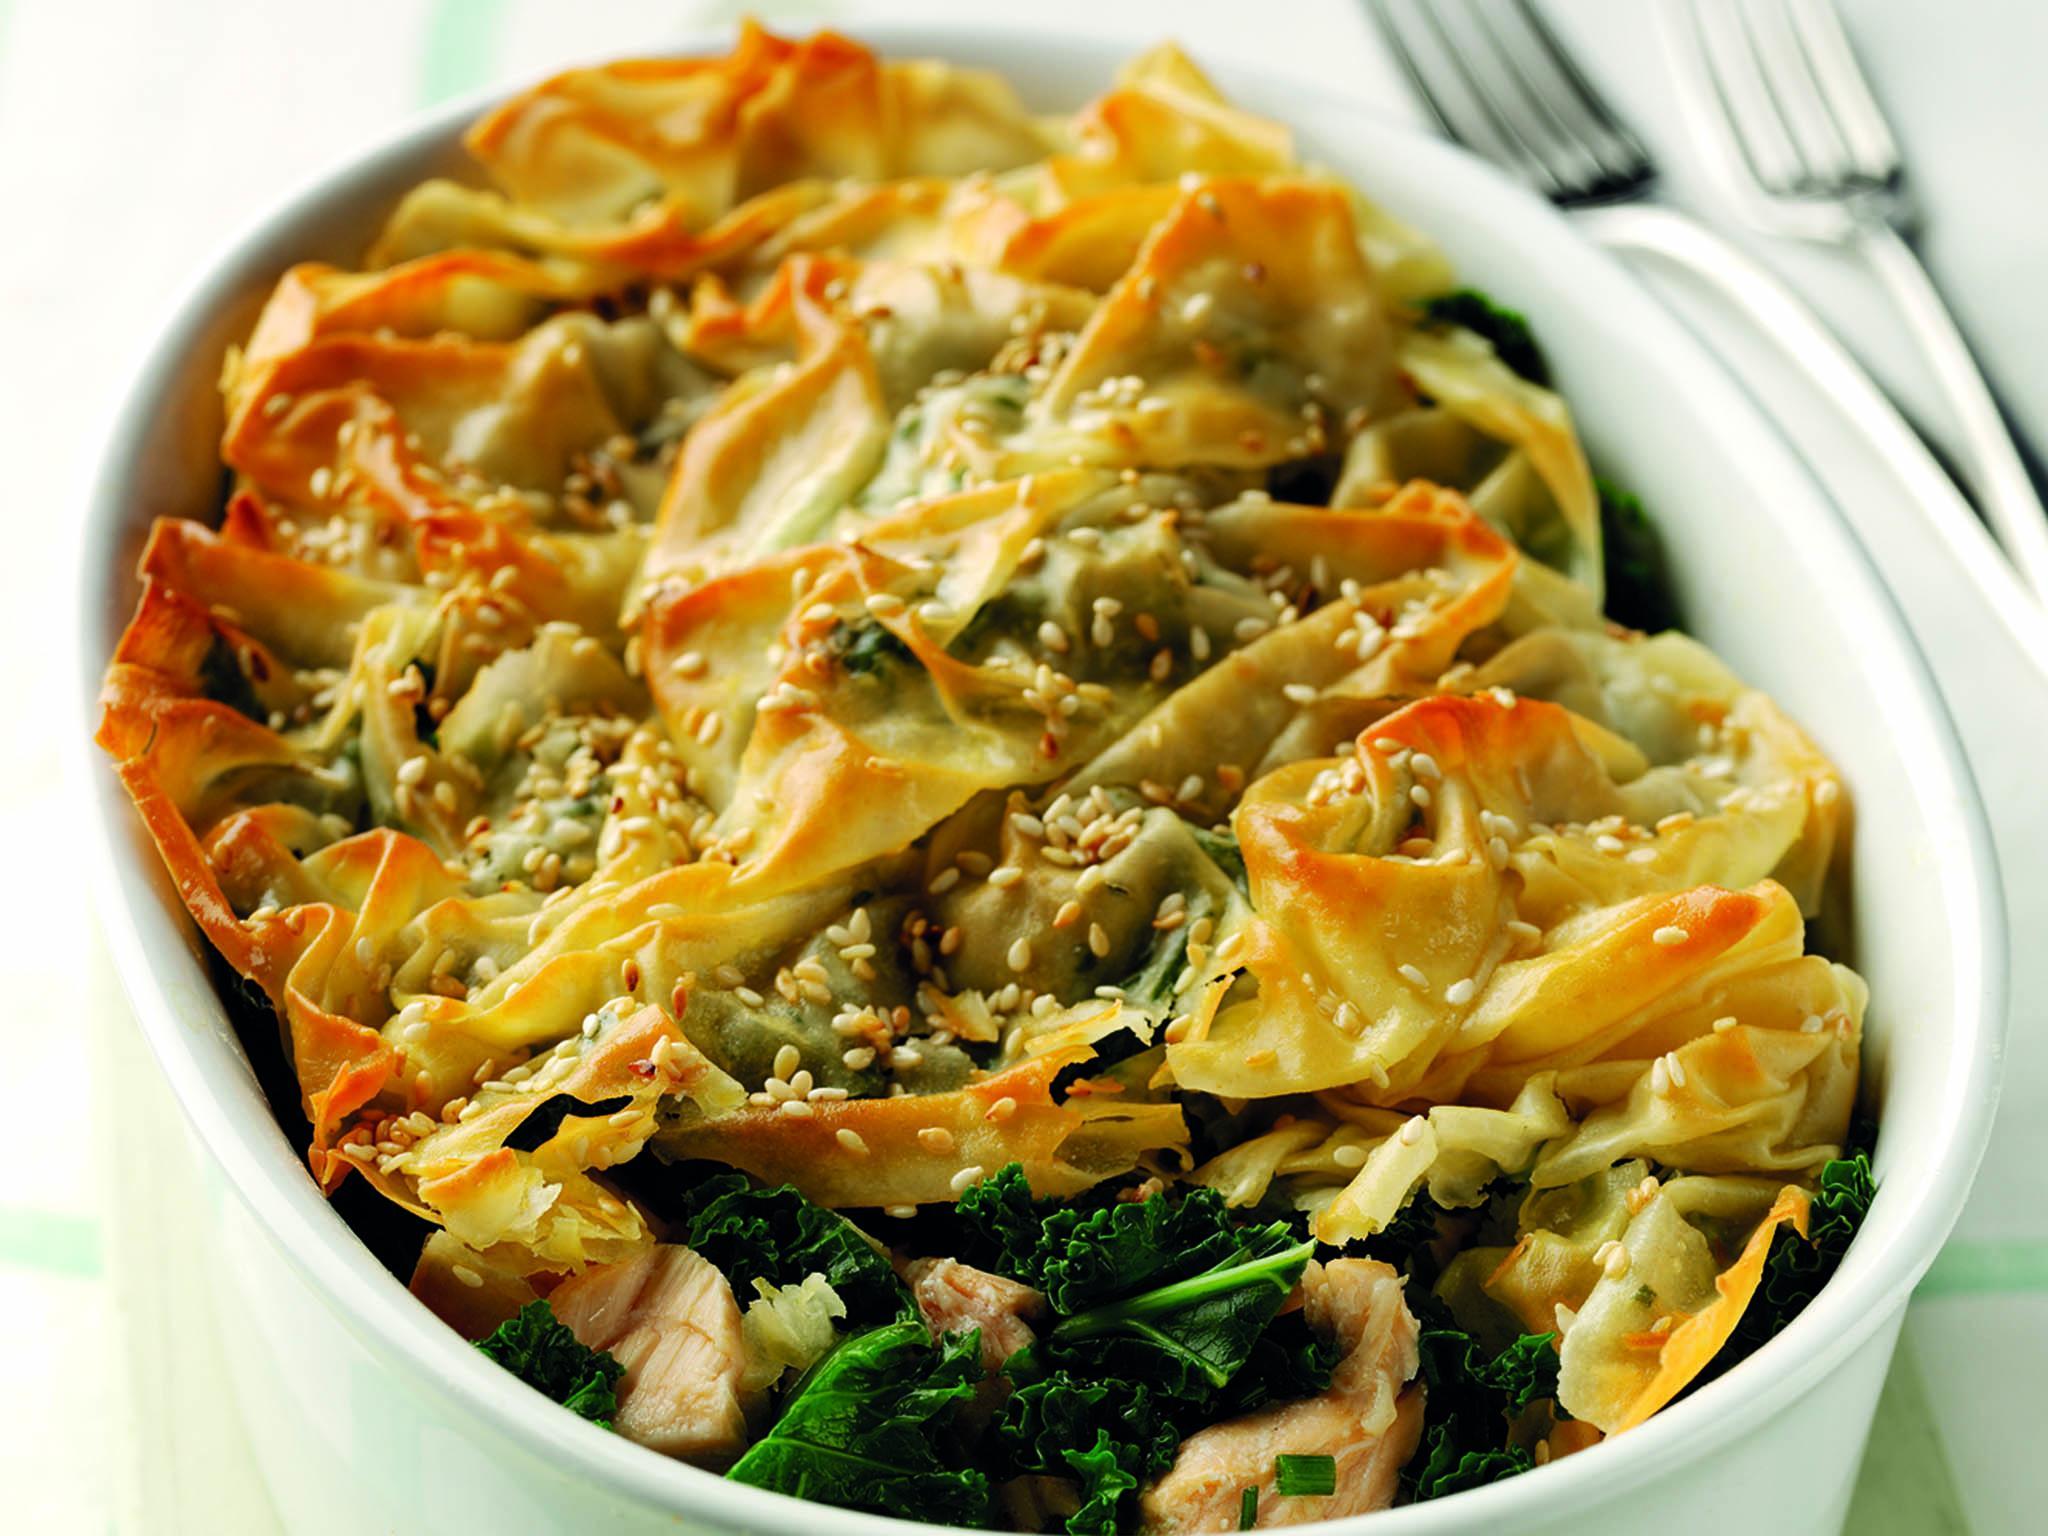 Filo factor: the pie’s crunchy topping is effortlessly impressive